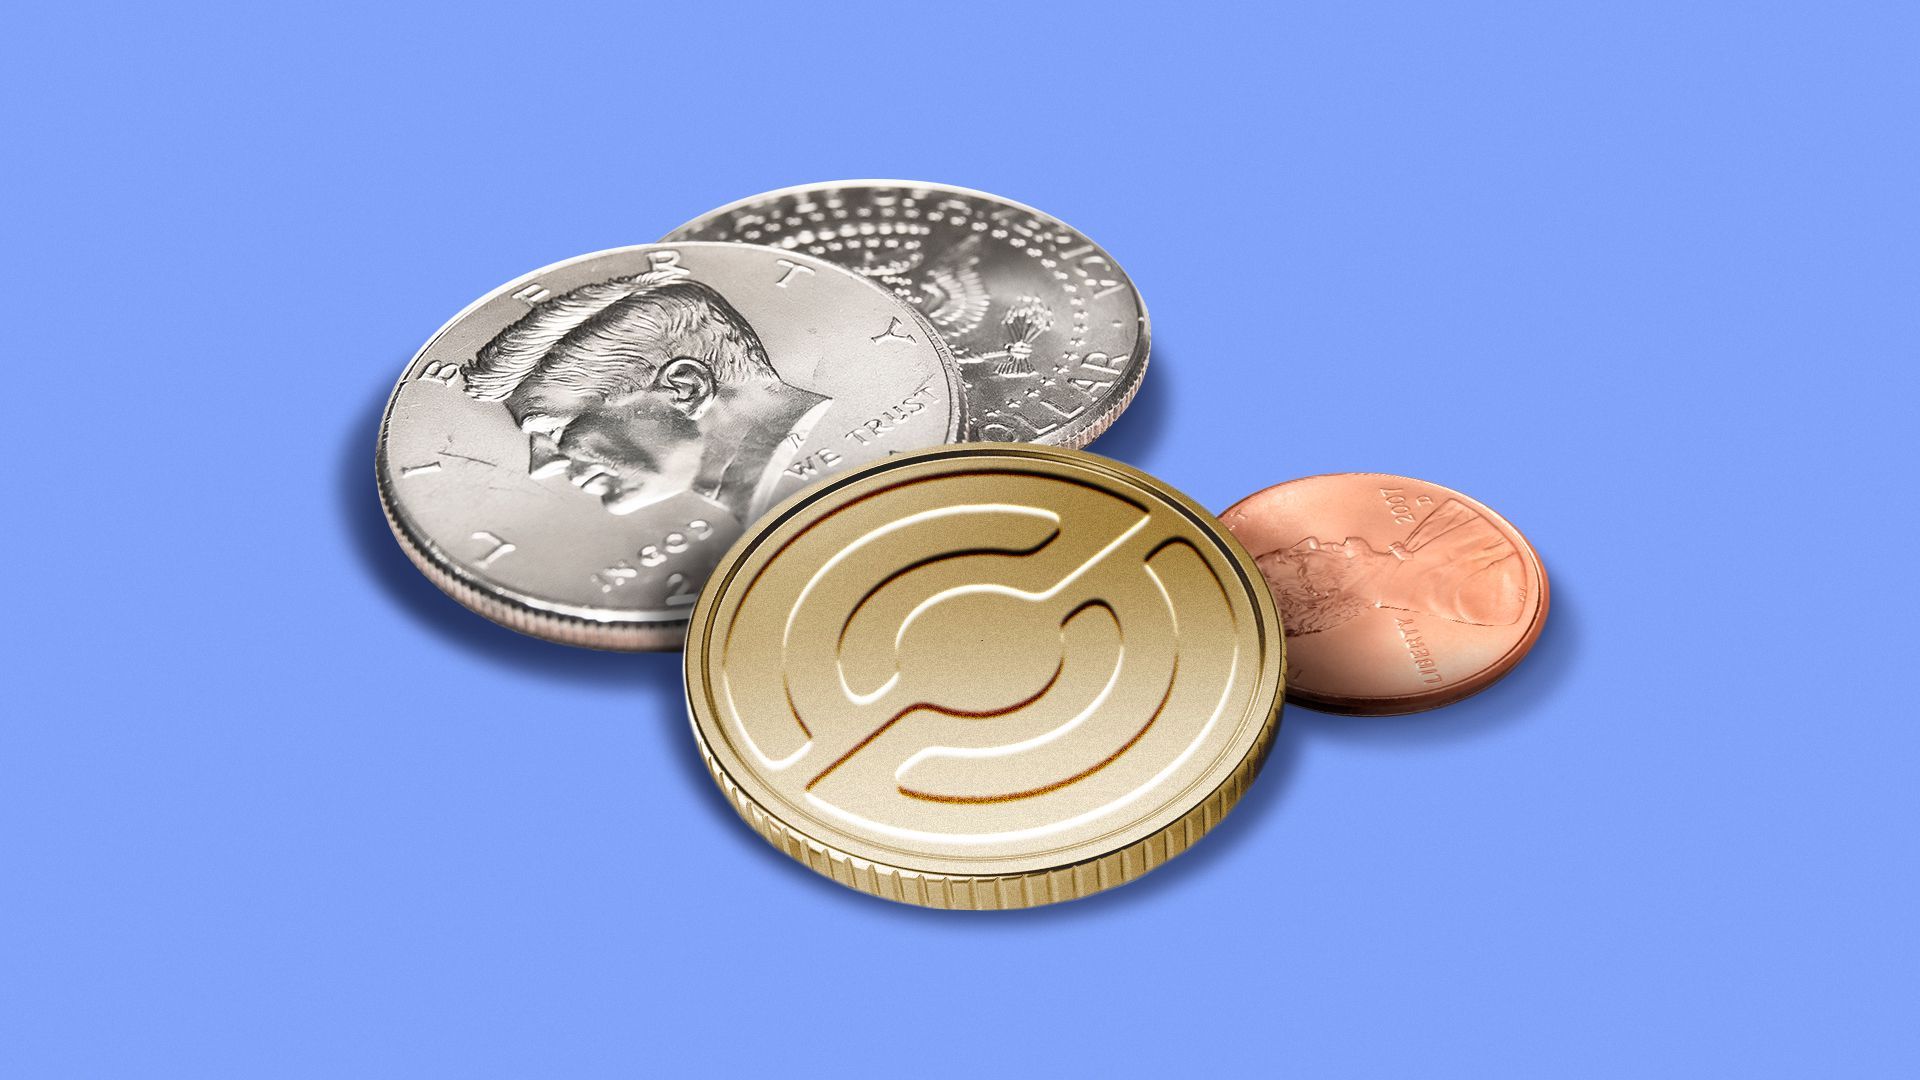 Illustration of several U.S. coins as well as a coin with the Circle logo 